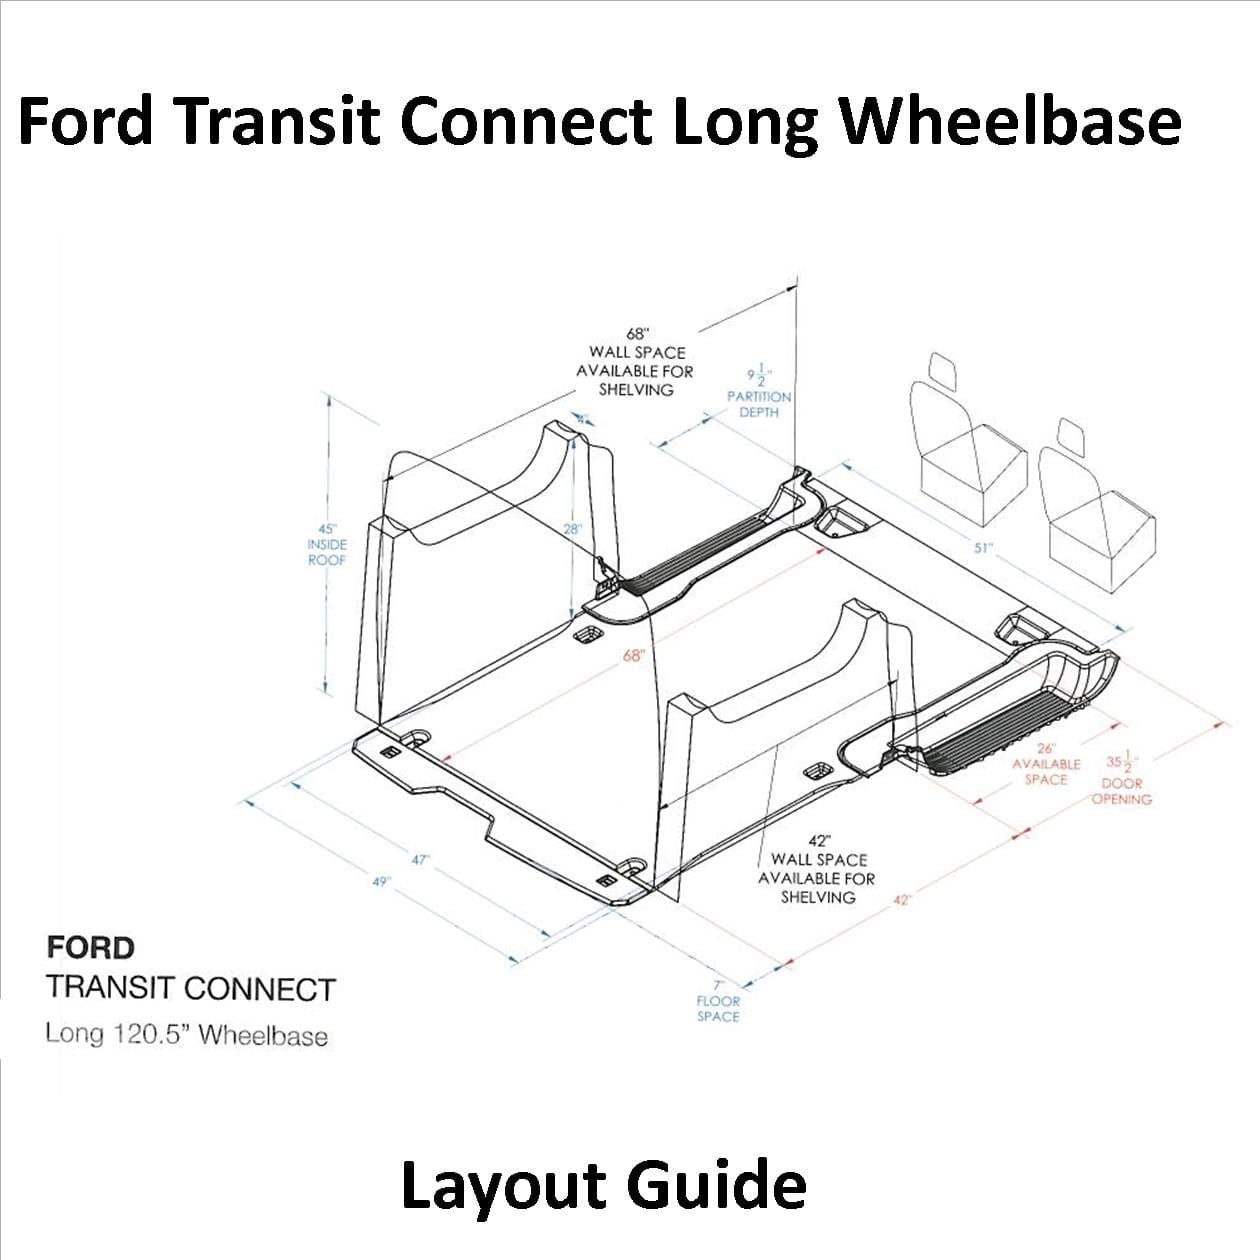 Ford Transit Connect Long Wheelbase